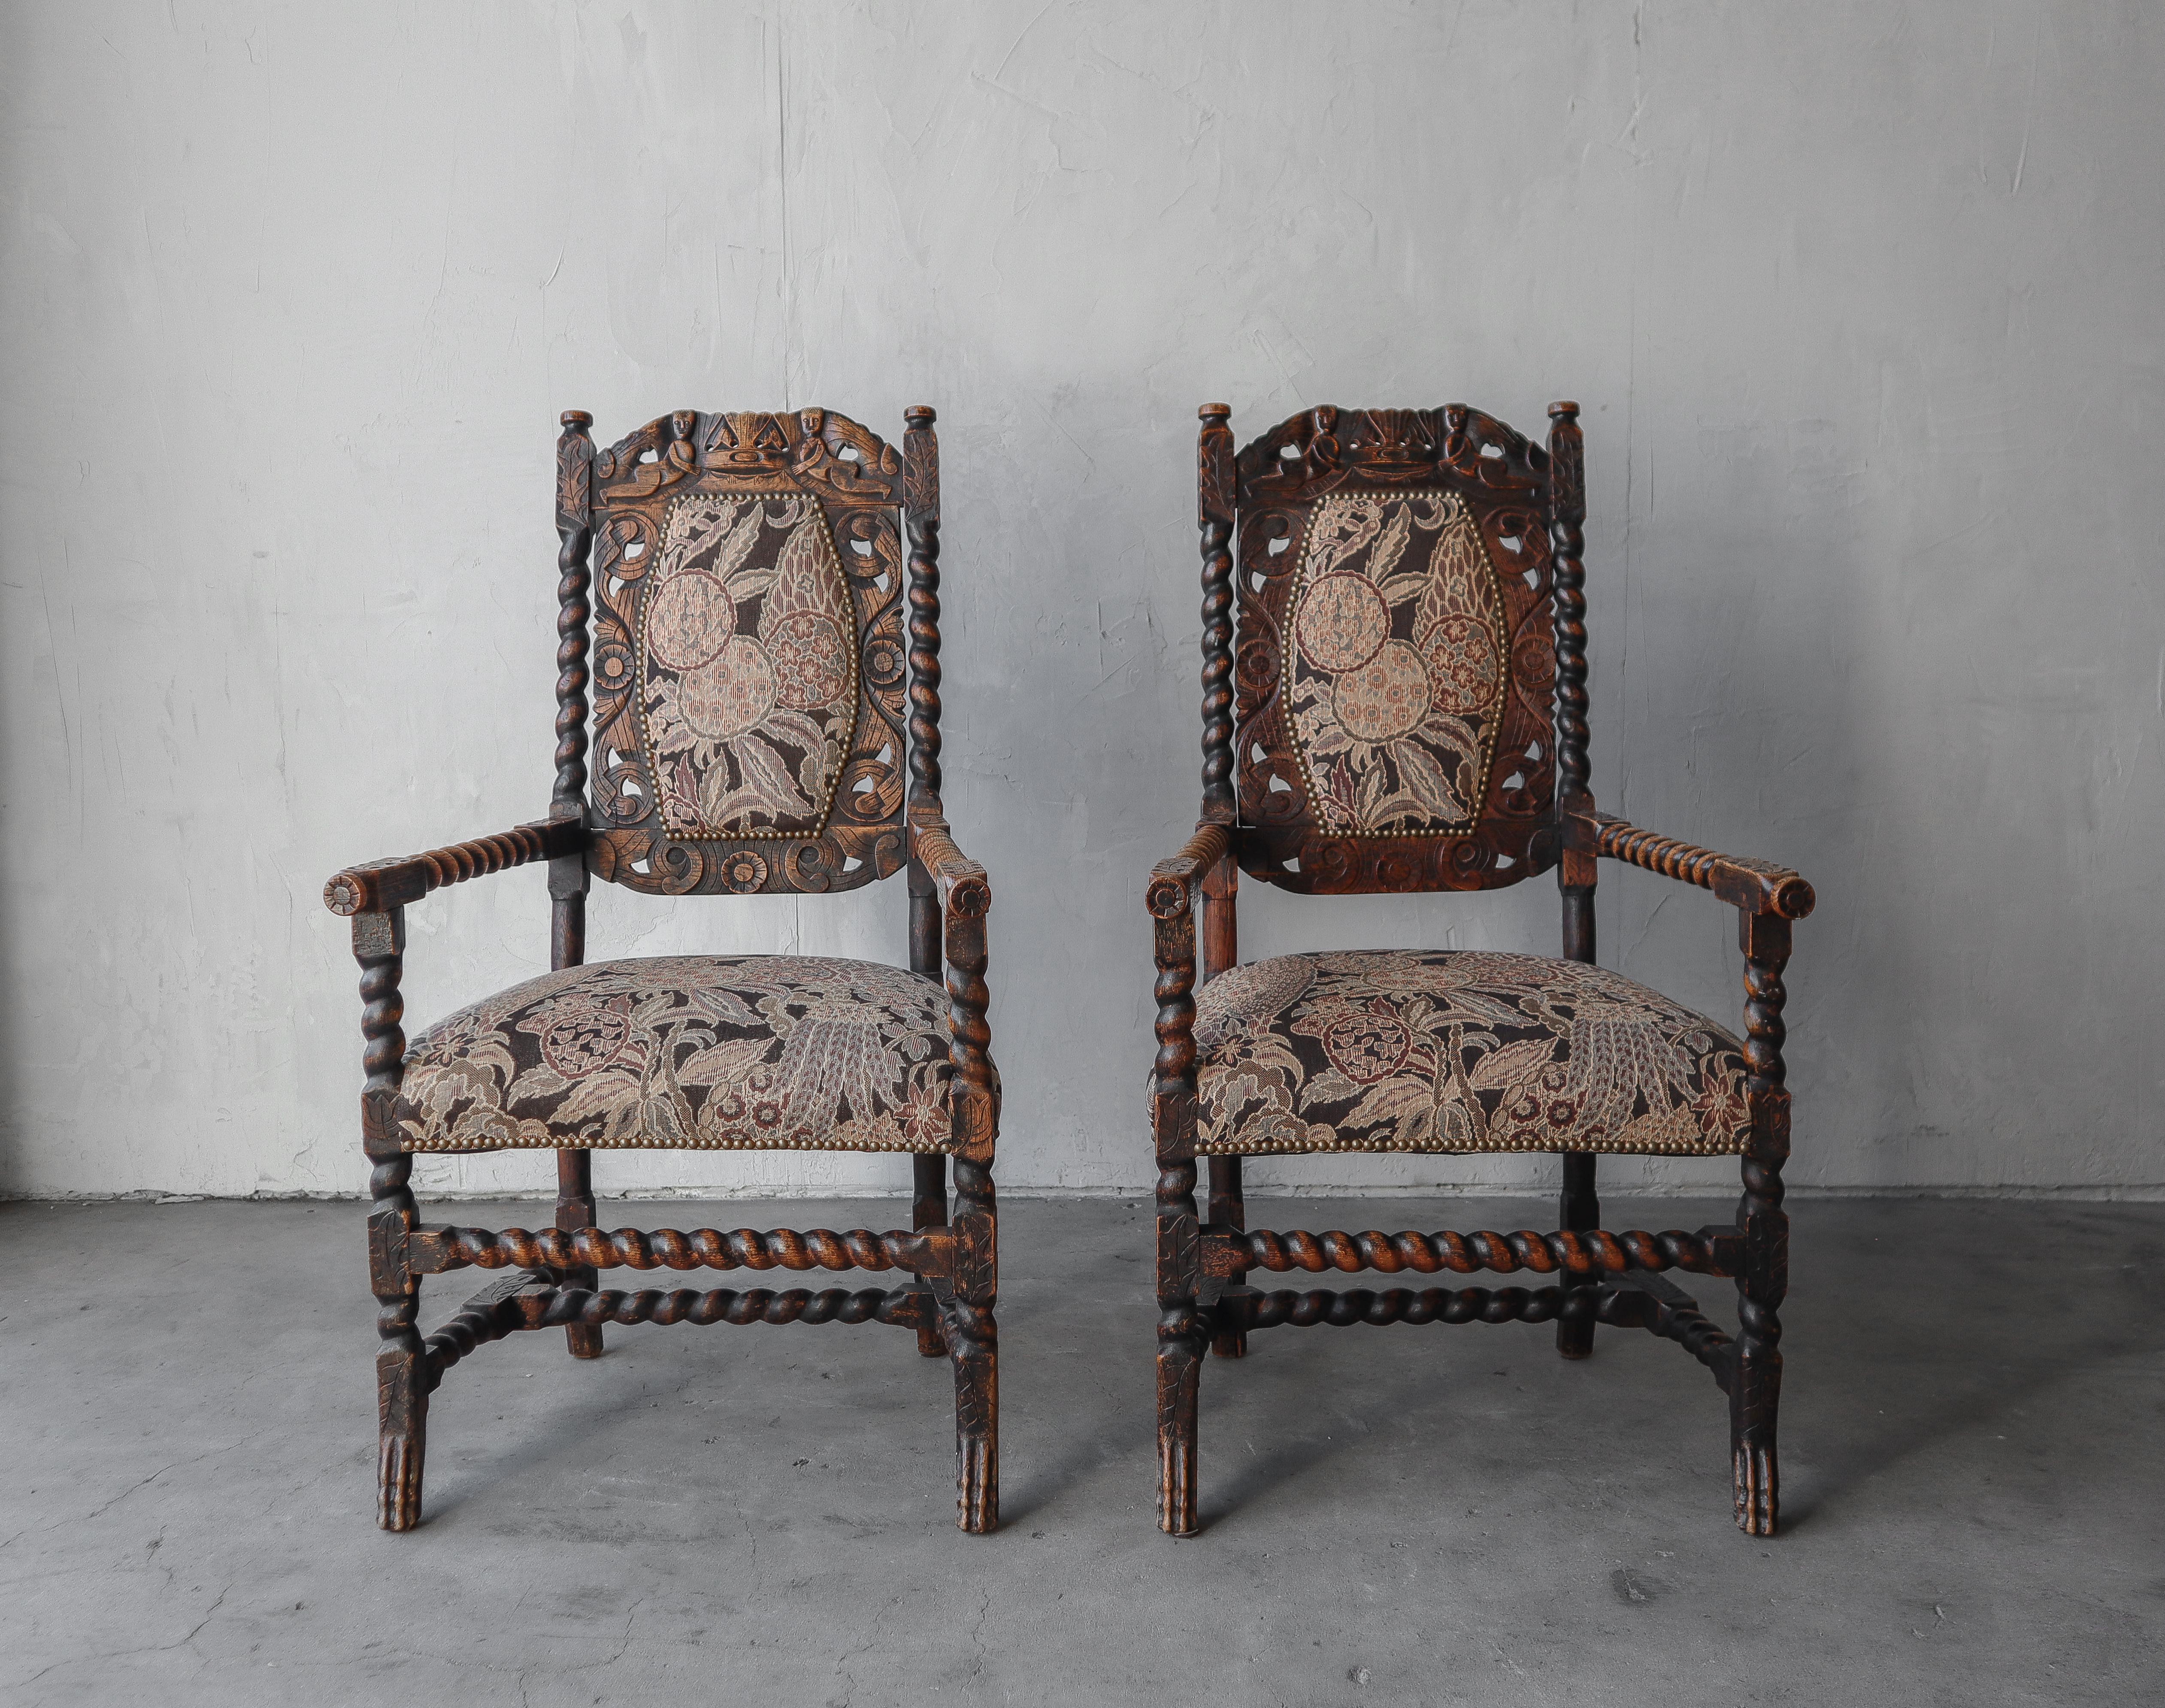 Exquisite pair or antique carved wood occasional arm chairs. Chairs feature incredible carved details making for lots of interest. 

The chairs are in excellent antique condition. The wood shows wear to the finish but it adds to the look and depth